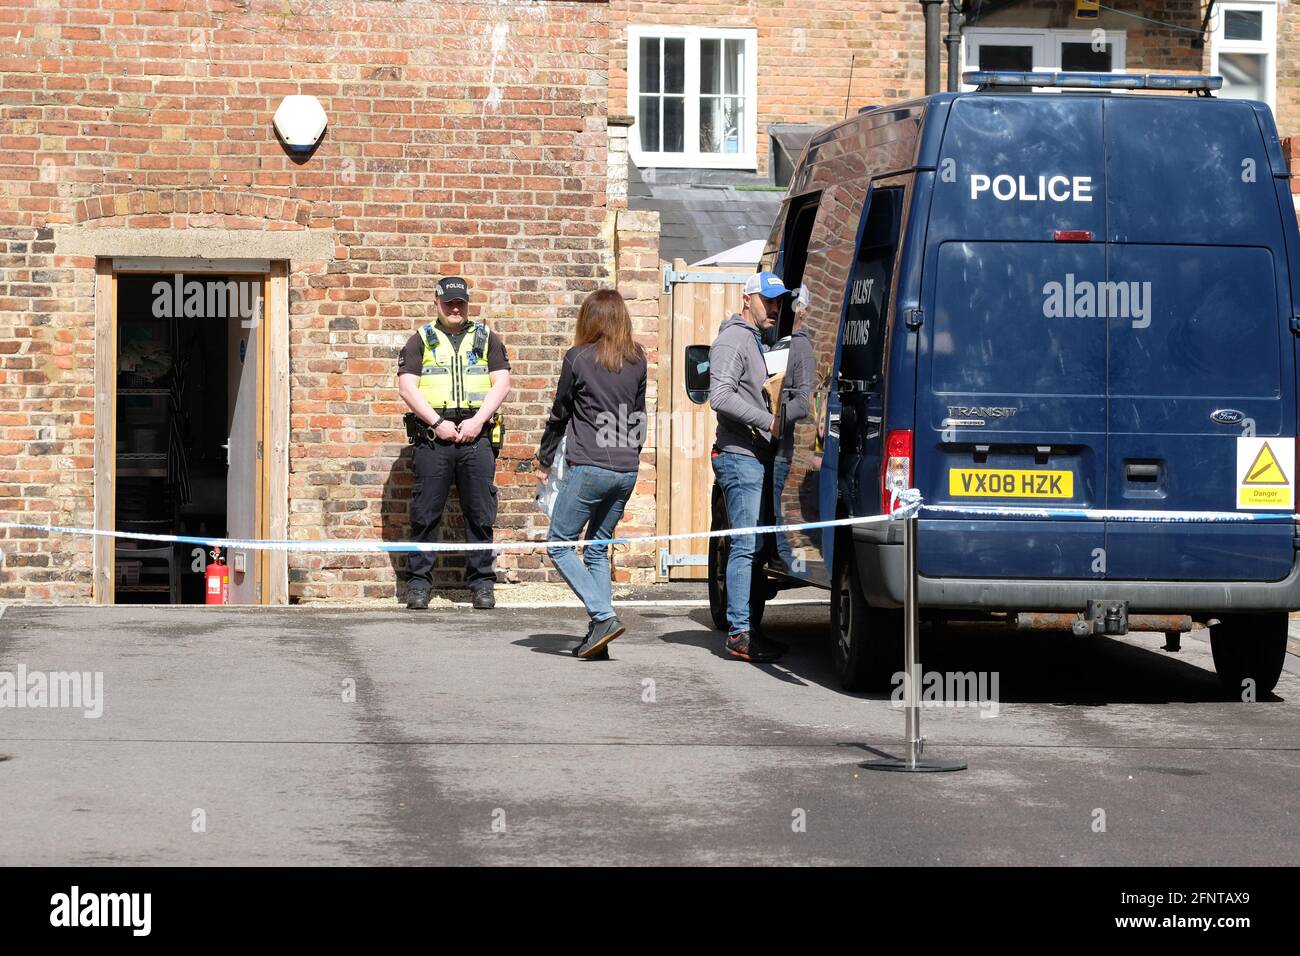 Gloucester, Gloucestershire, UK - Wednesday 19th May 2021 - Police take kit and supplies into the rear of the  Clean Plate cafe as Police begin excavations in the search for Mary Bastholm who went missing in 1968 aged just 15 years old and who may have been a victim of serial killer Fred West. Photo Steven May / Alamy Live News Stock Photo